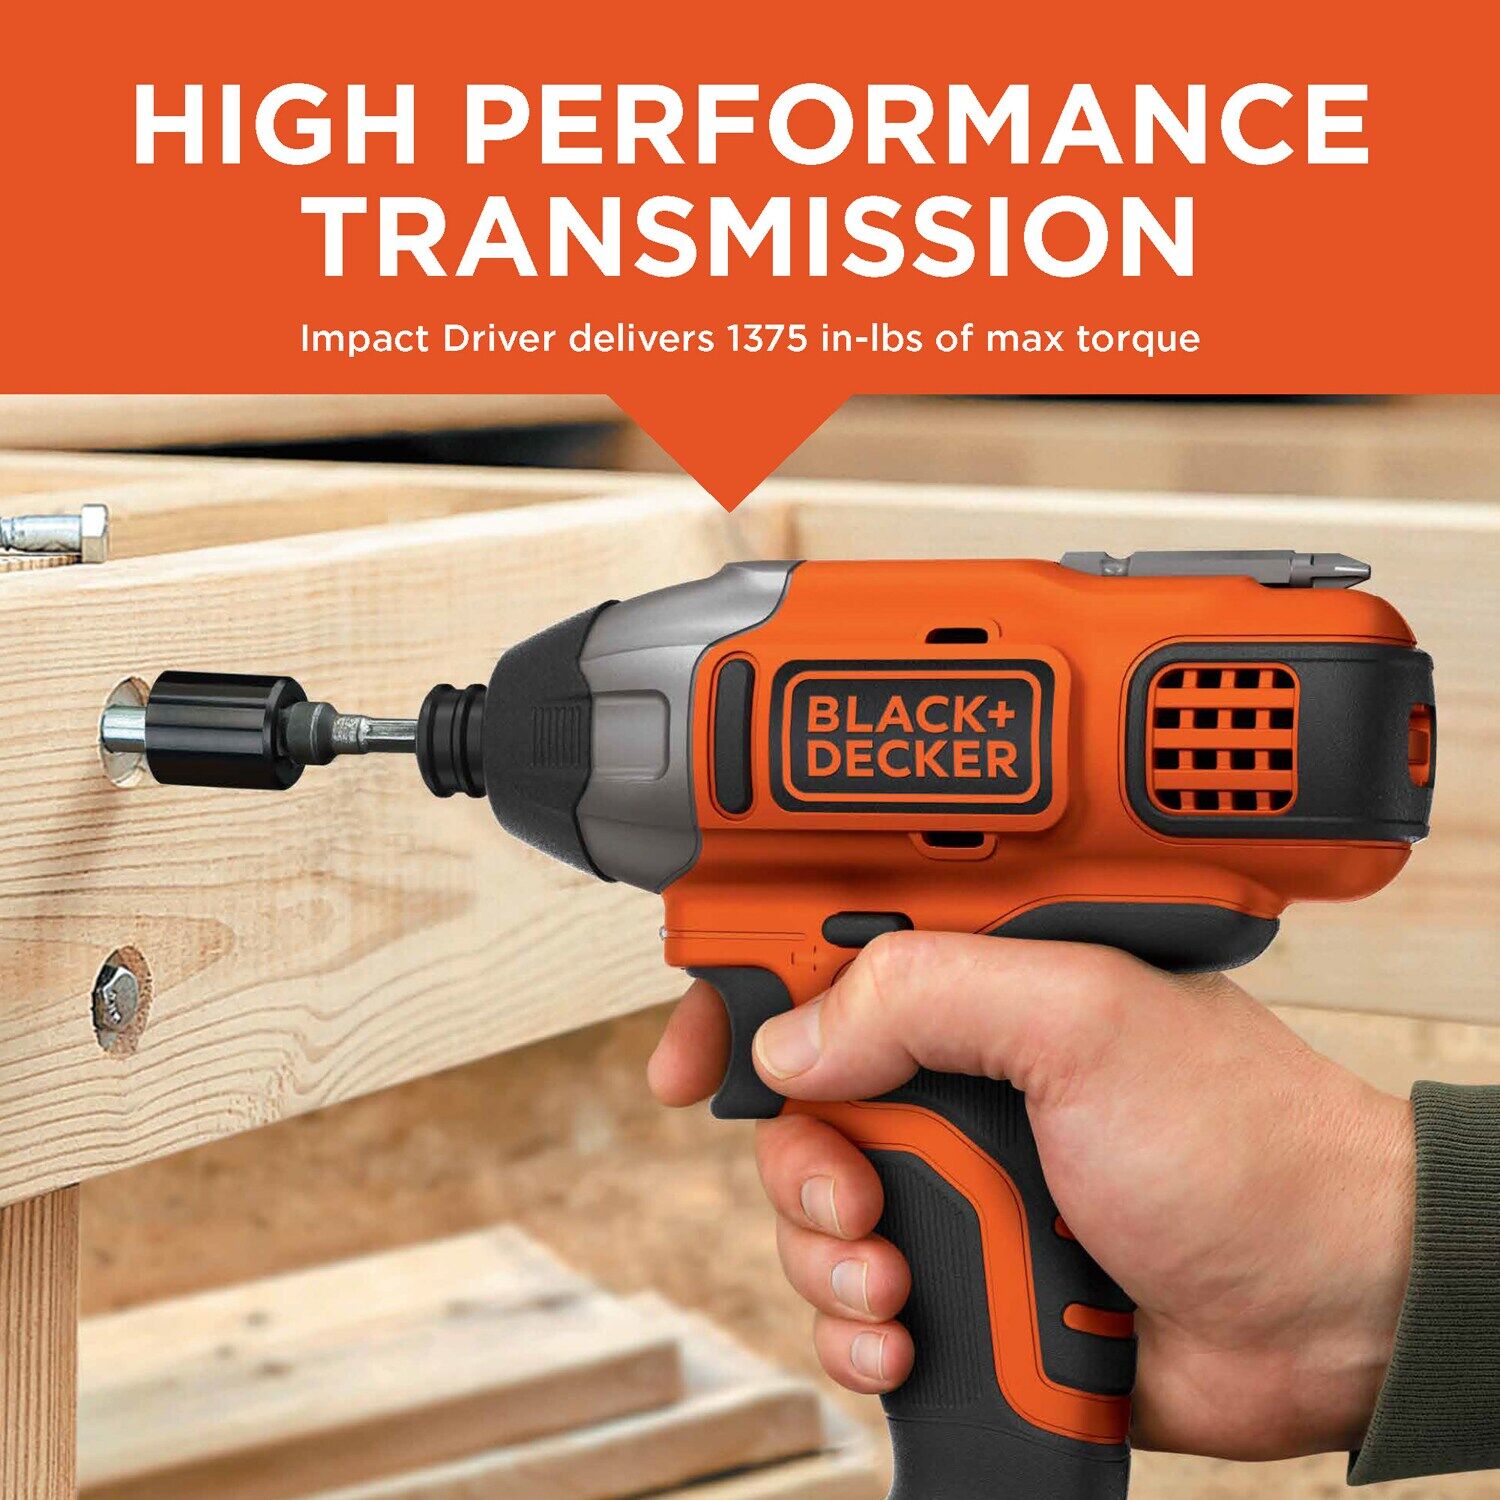 Person using a Black and Decker 20 volt max lithium ion cordless impact driver to drve a screw into wooden material